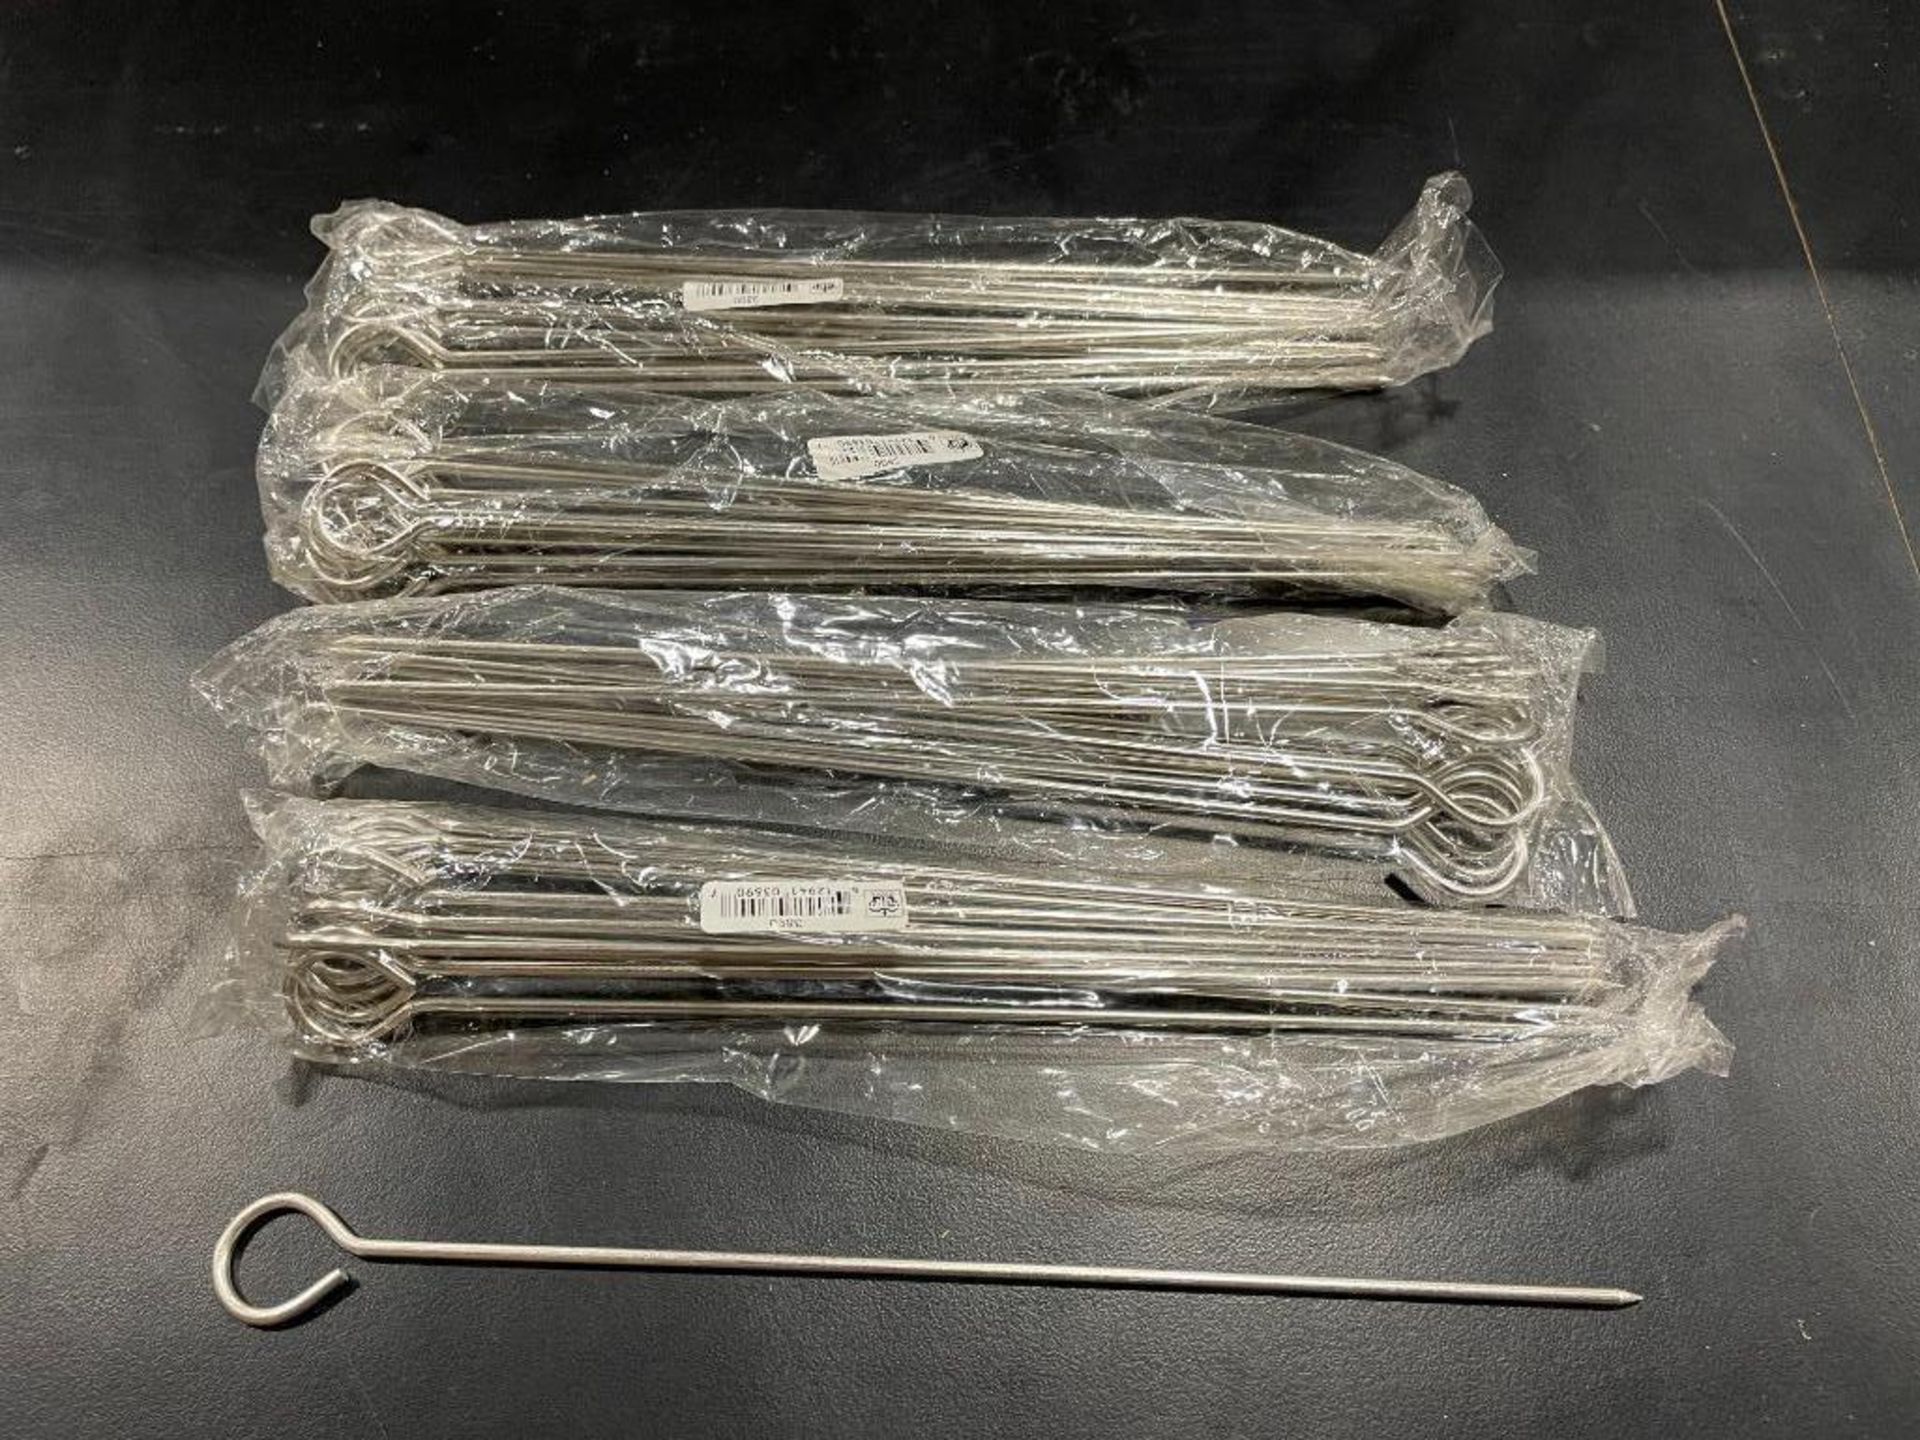 LOT OF APPROX. (48) 10" STAINLESS STEEL SKEWERS - JOHNSON ROSE 3890 - NEW - Image 2 of 2